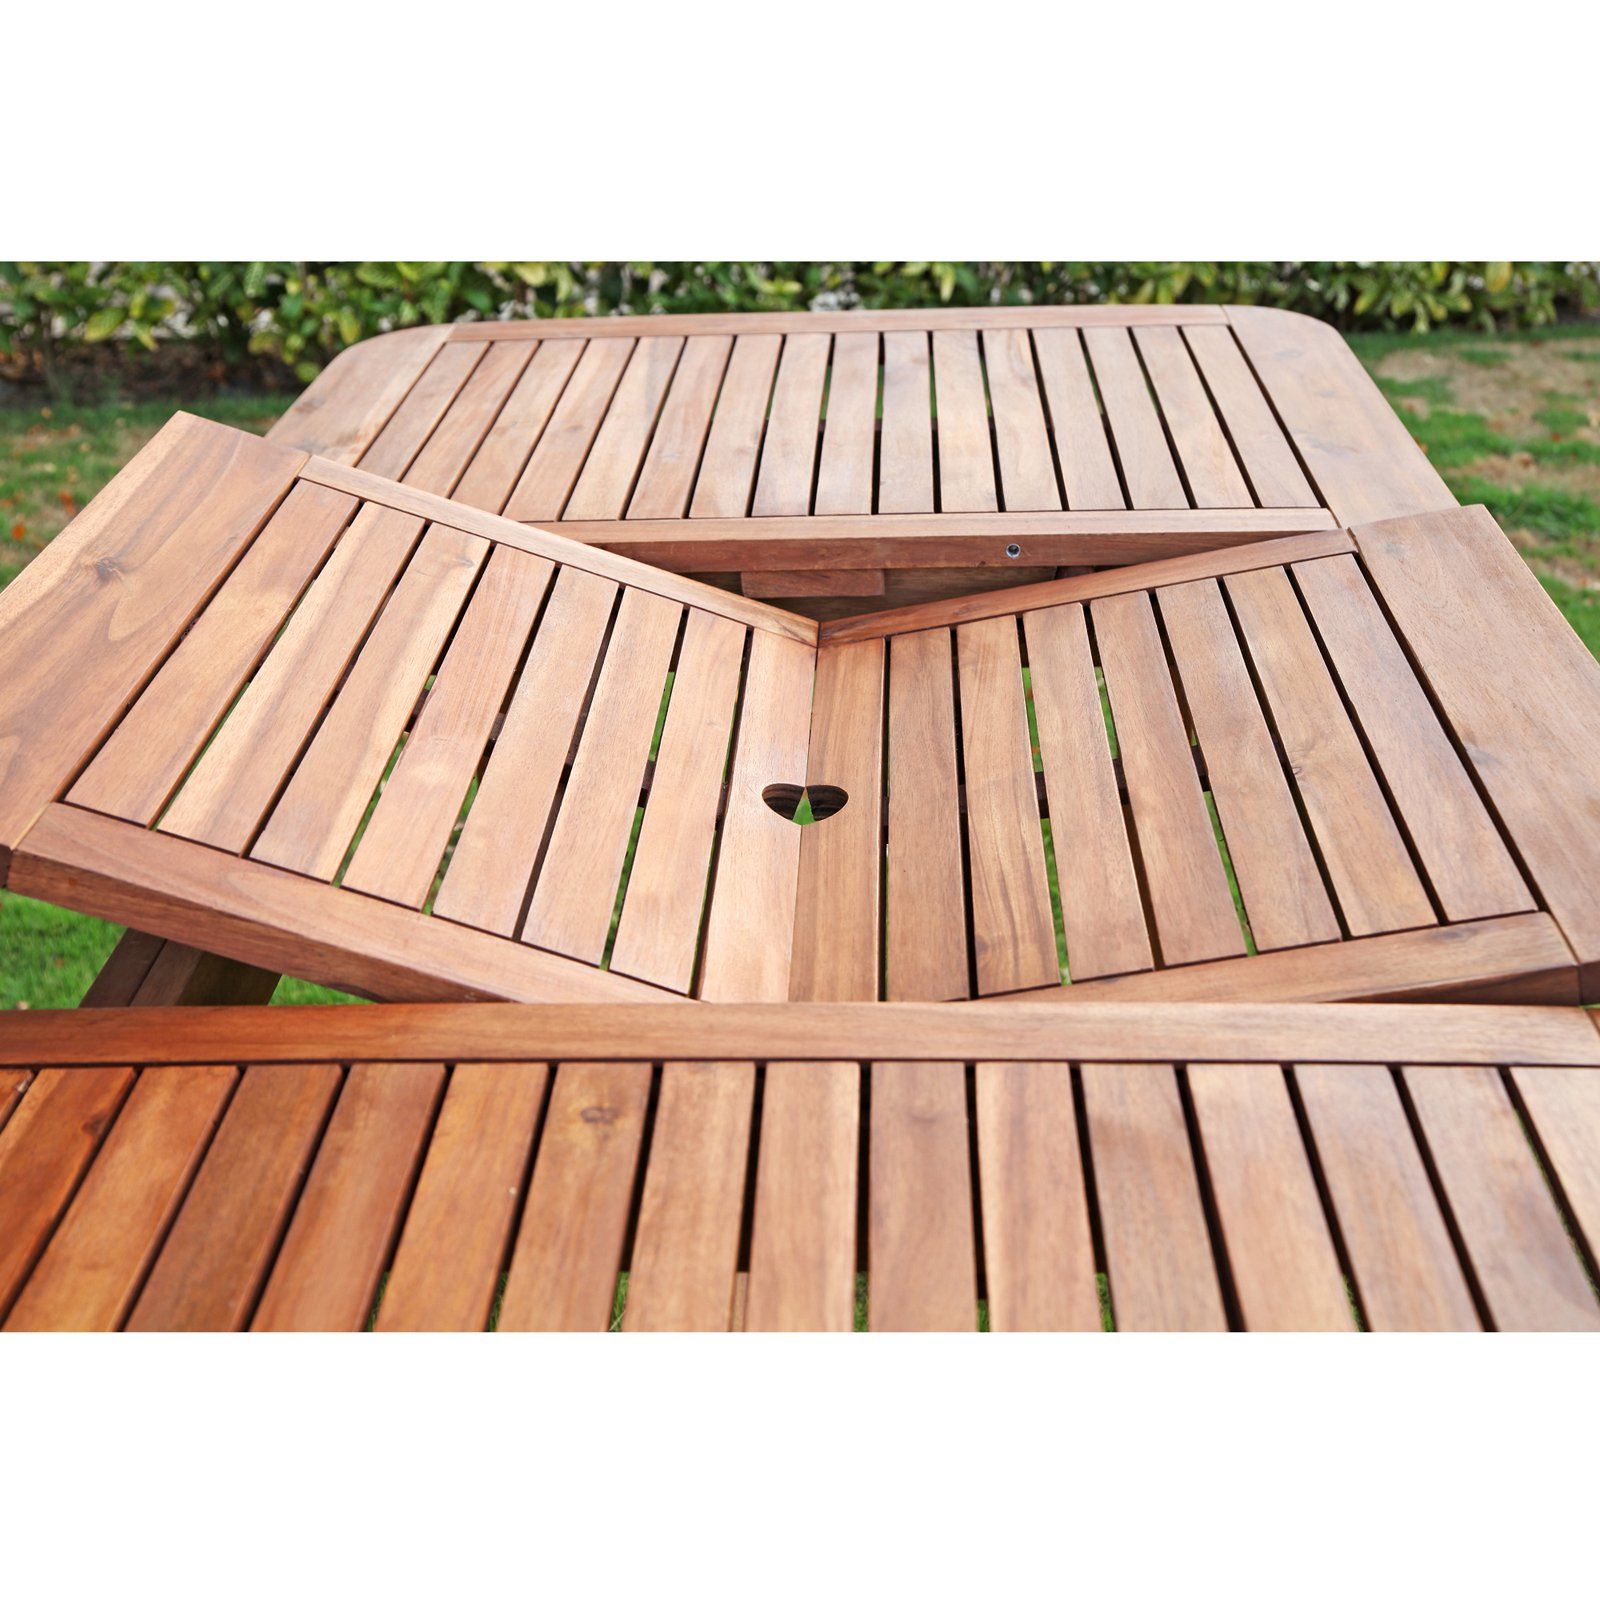 2019 Acacia Wood Patio Extendable Dining Table, Brown – Walmart With Regard To Acacia Wood Outdoor Tables (View 5 of 15)